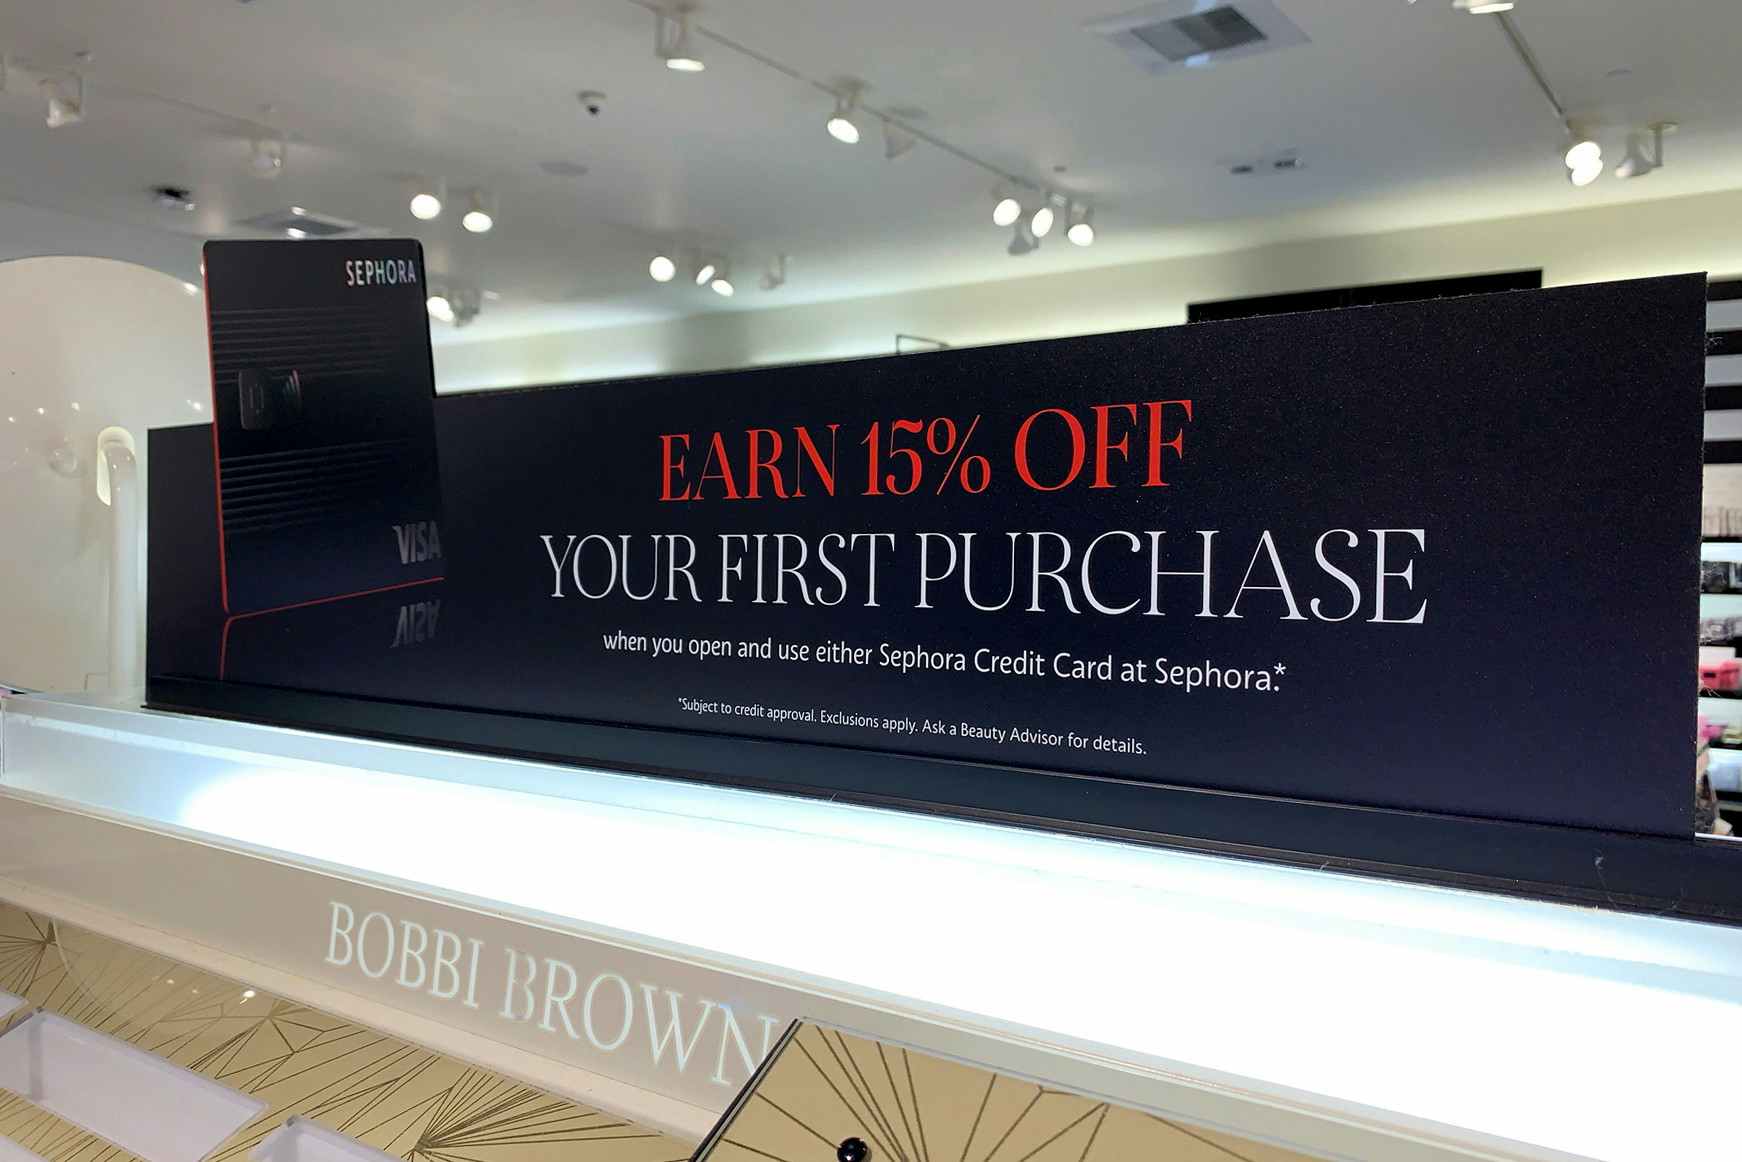 Sign for Sephora credit card in store.